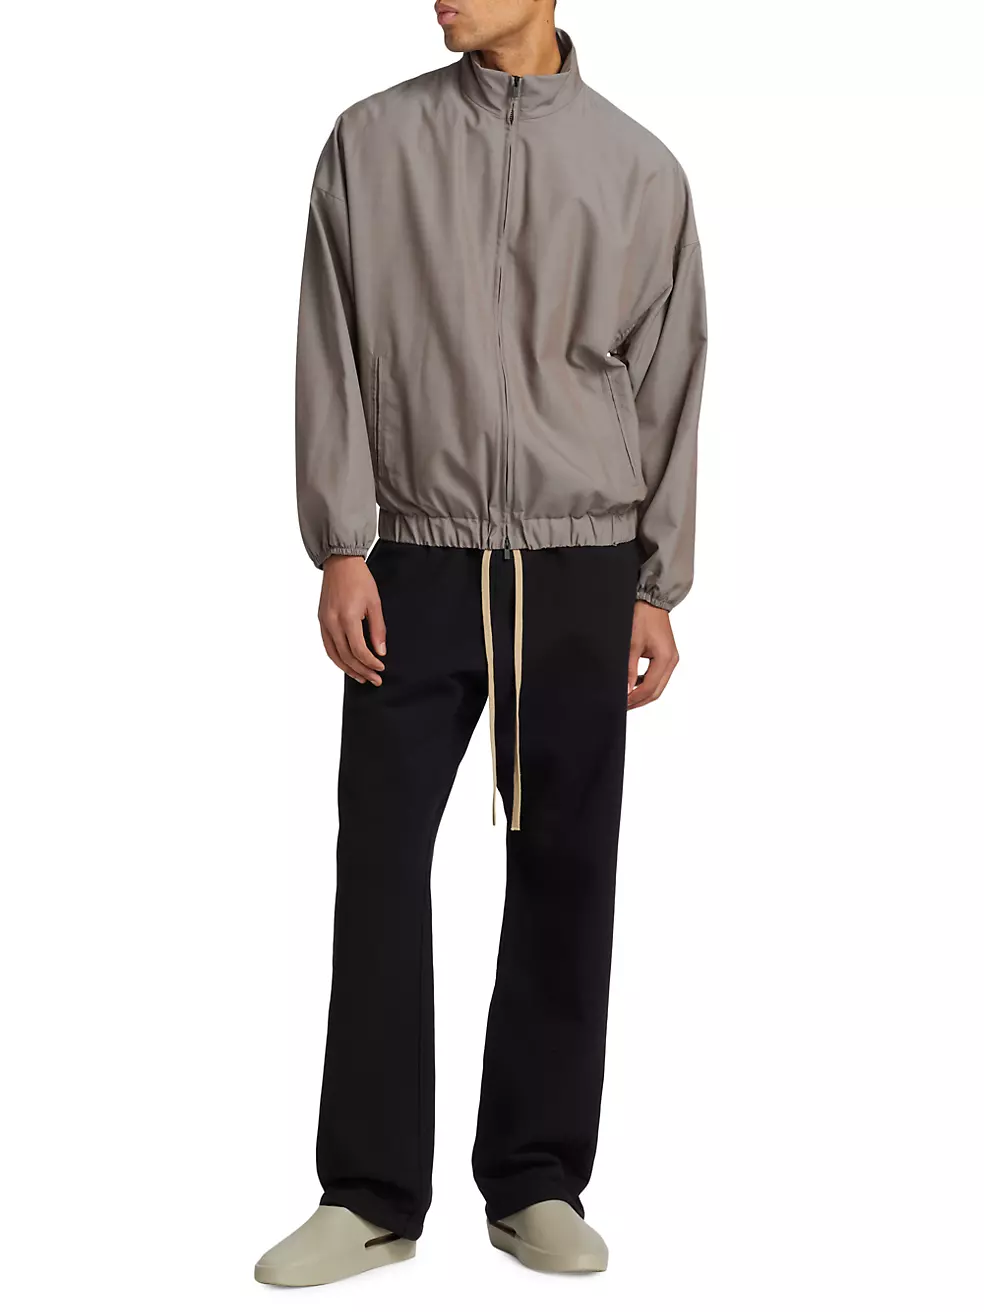 Shop Fear of God Eternal Cotton Relaxed-Fit Sweatpants | Saks